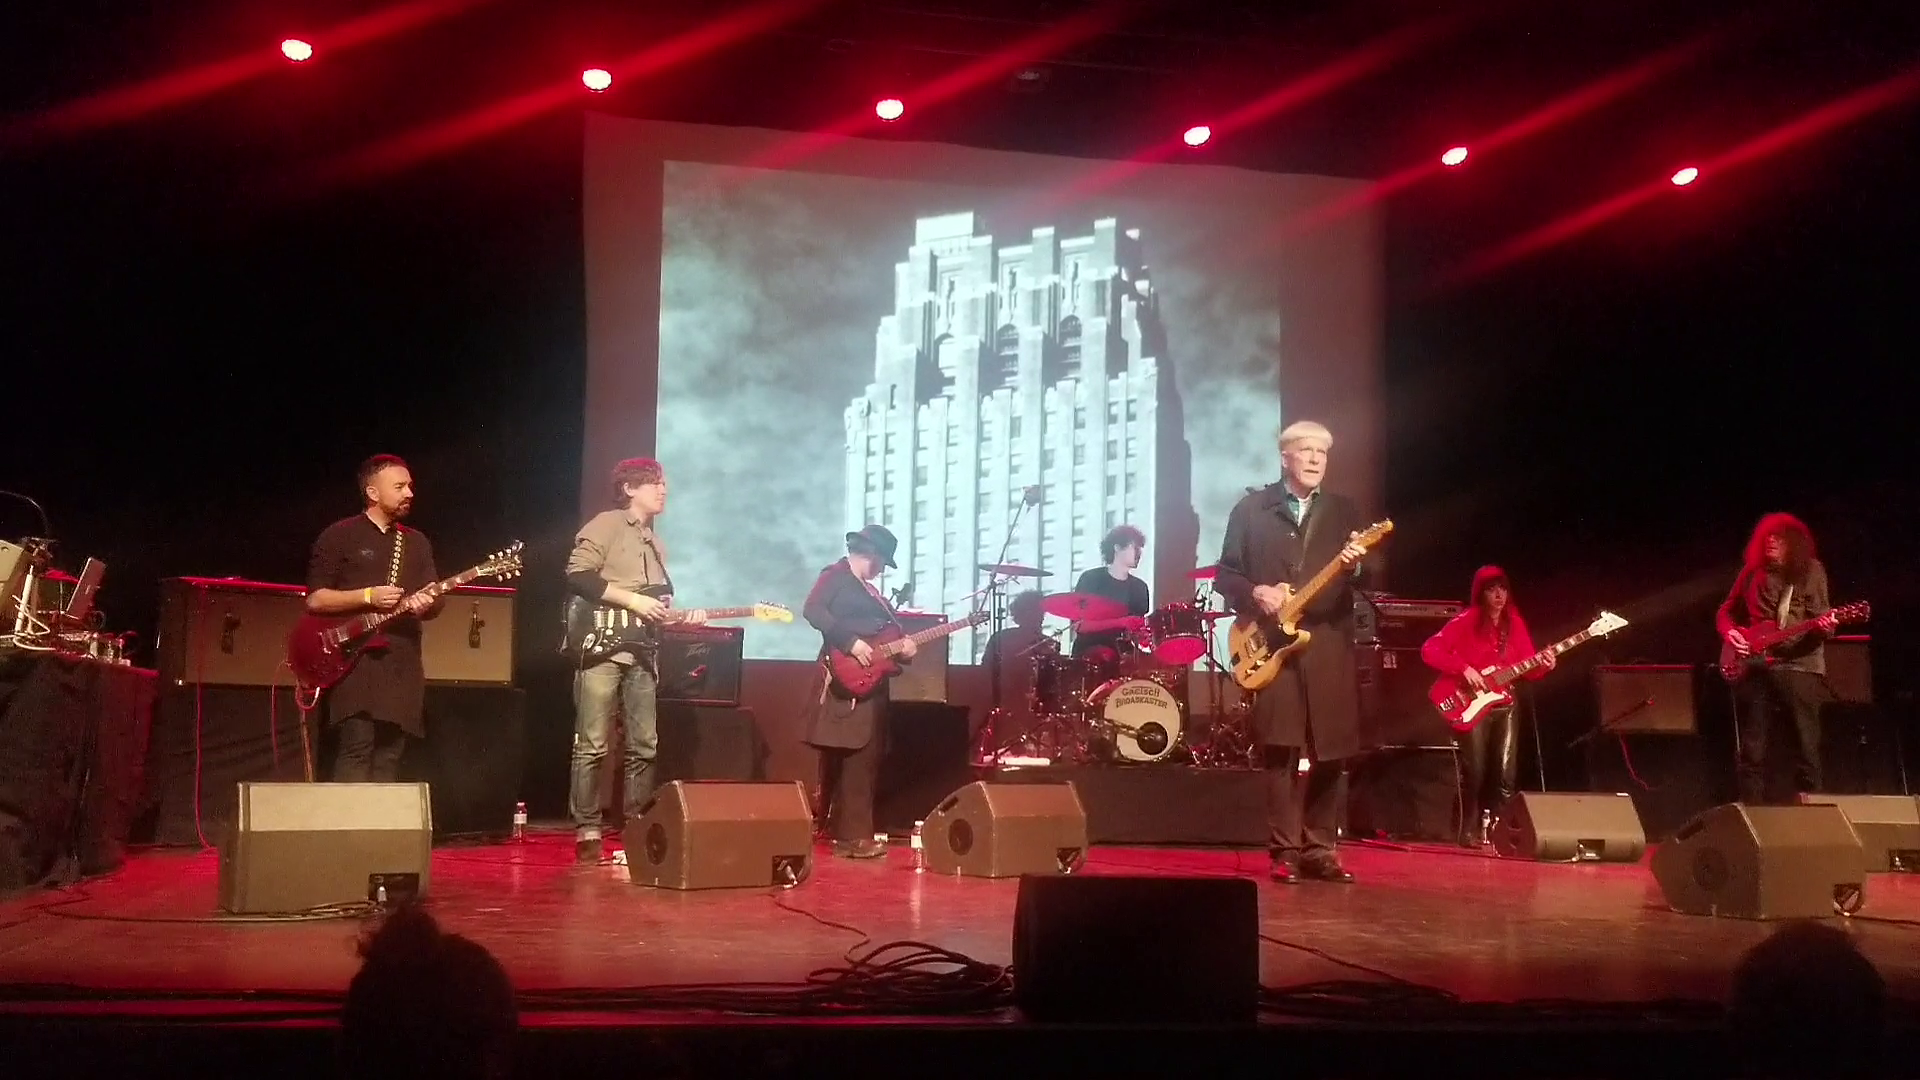 Video excerpt of the RHYS CHATHAM’s GUITAR ORCHESTRA @ BBMIX festival Paris | 27 Nov. 2021